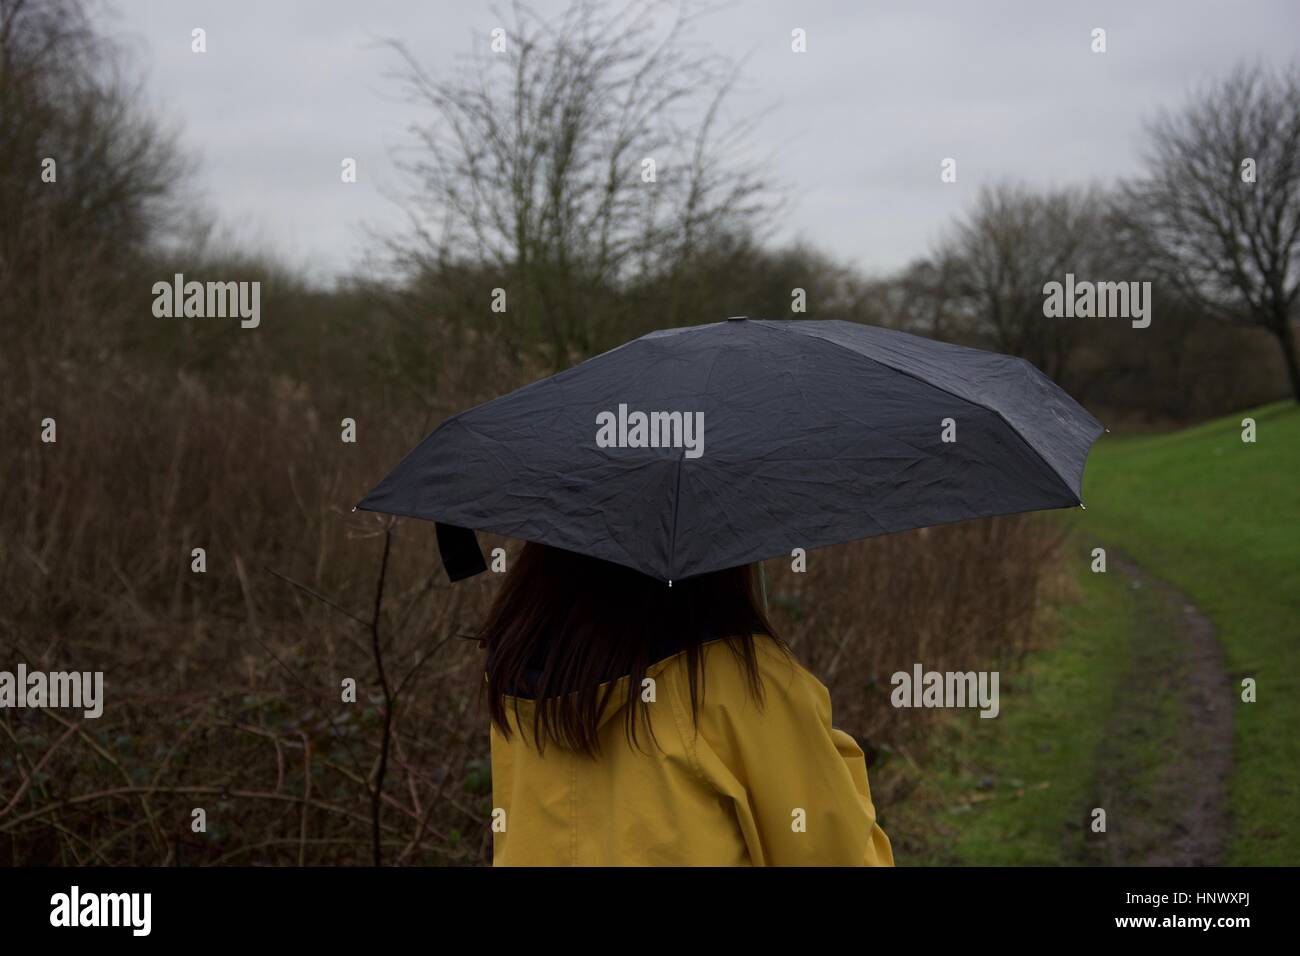 A girl in a yellow raincoat holding a black umbrella in the rain in a field Stock Photo